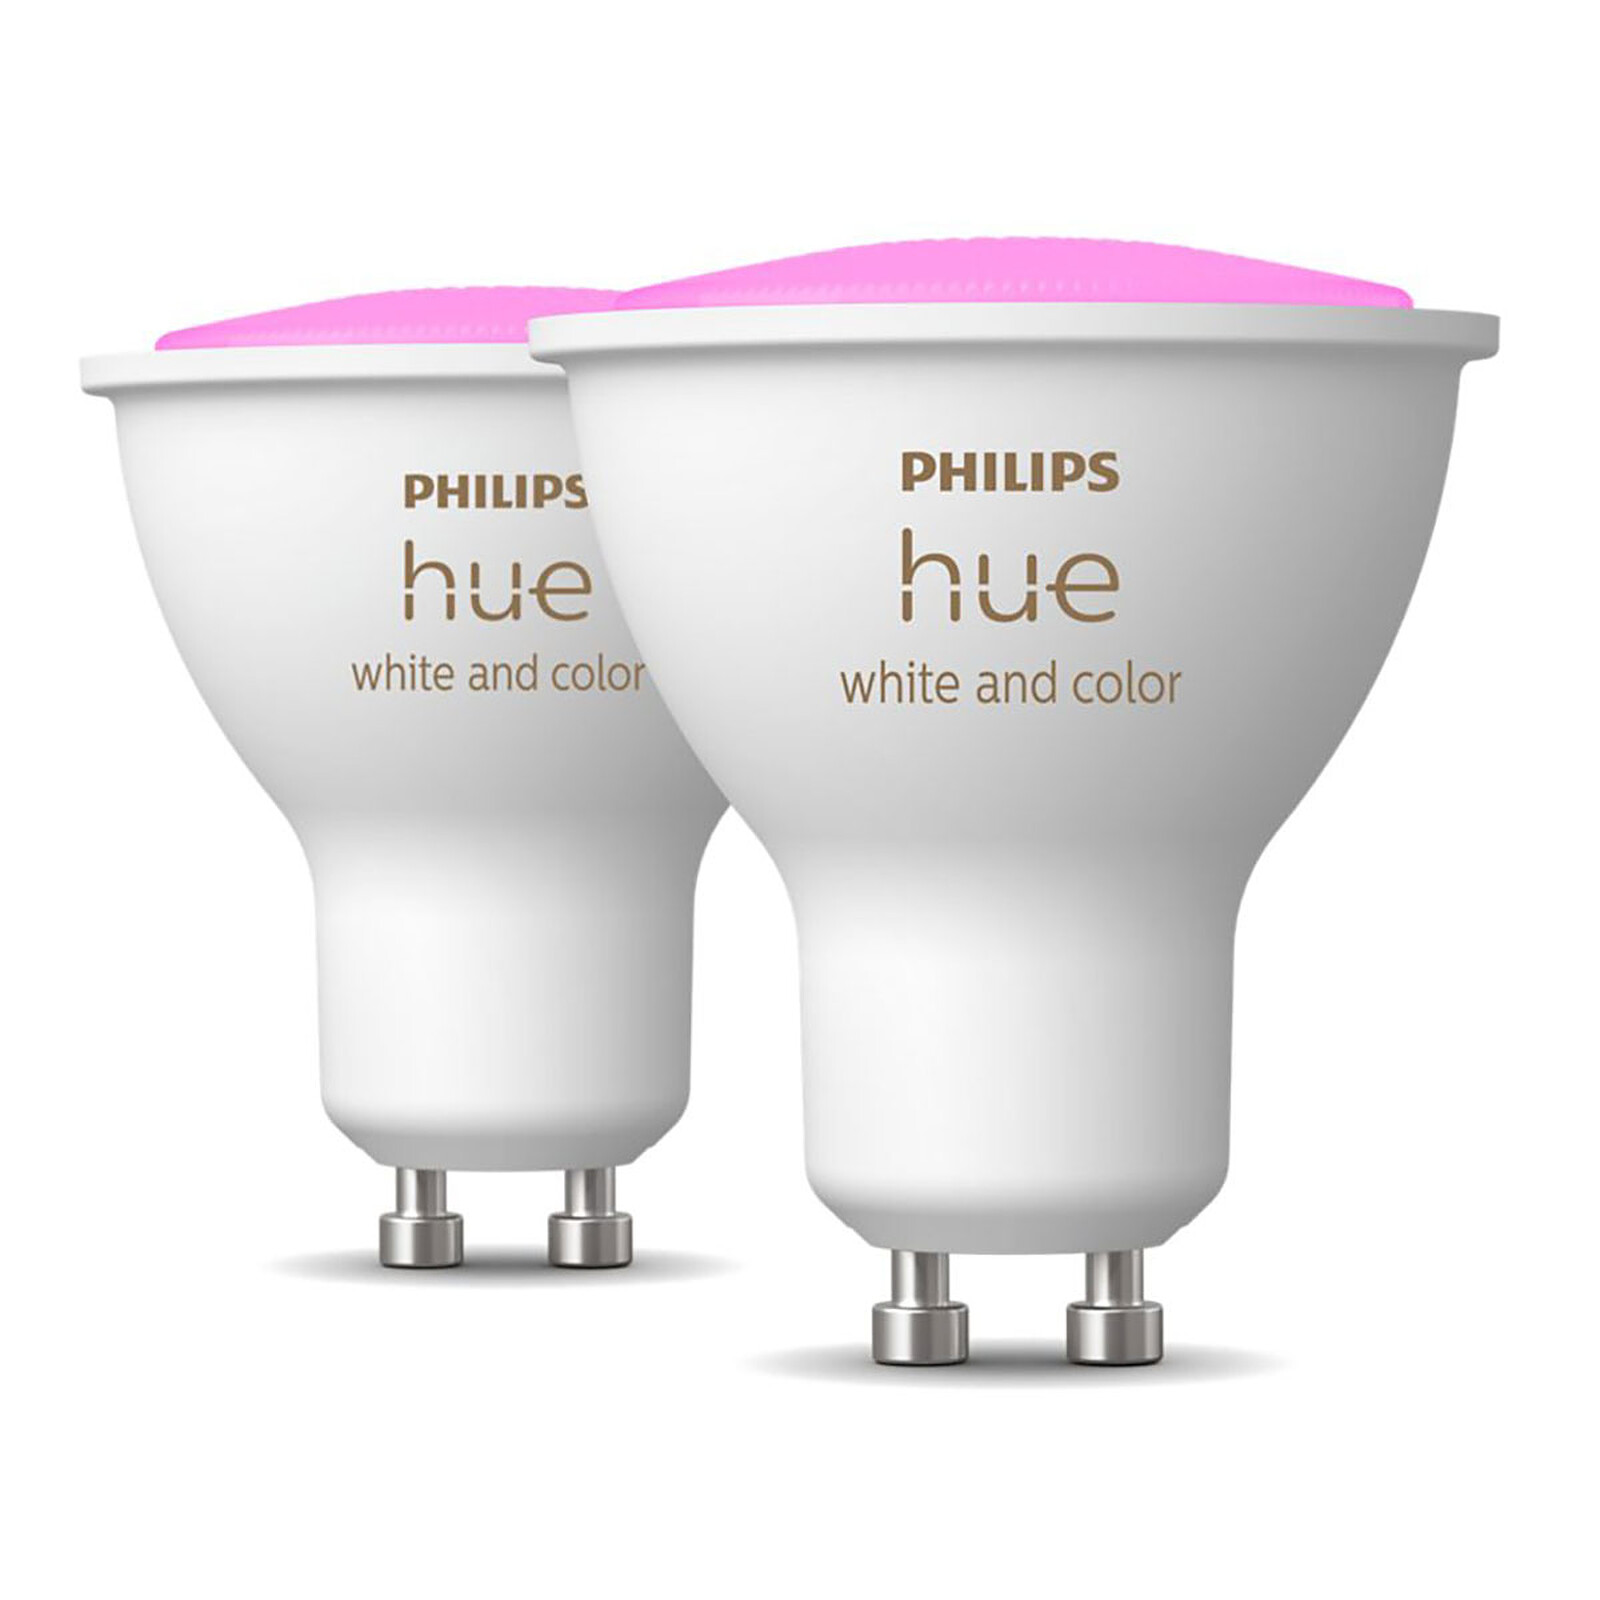 Philips Hue White and Color GU10 5.7 W Bluetooth x 2 - Smart light bulb -  LDLC 3-year warranty